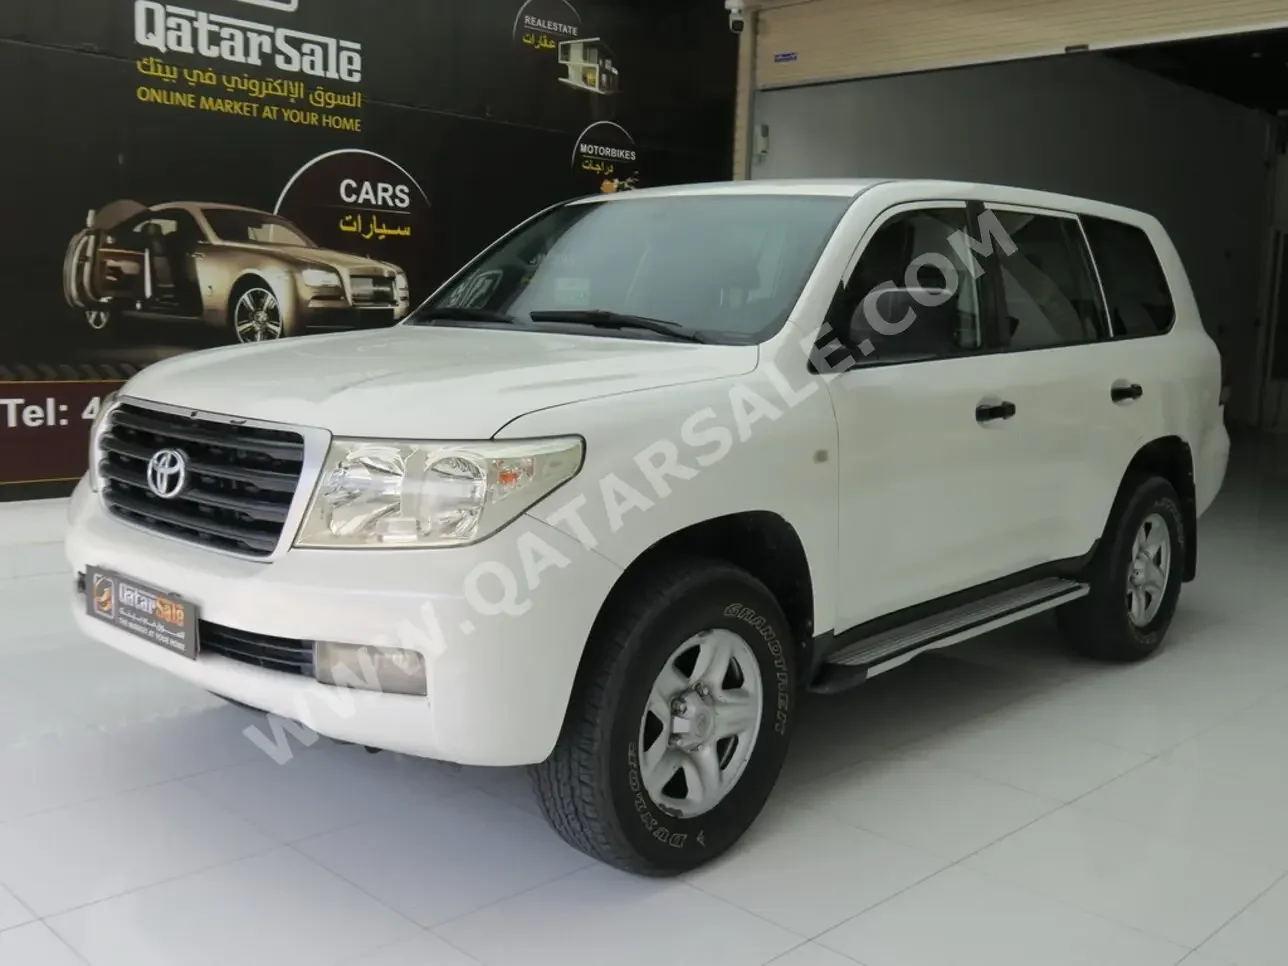 Toyota  Land Cruiser  G  2010  Automatic  177,000 Km  6 Cylinder  Four Wheel Drive (4WD)  SUV  White